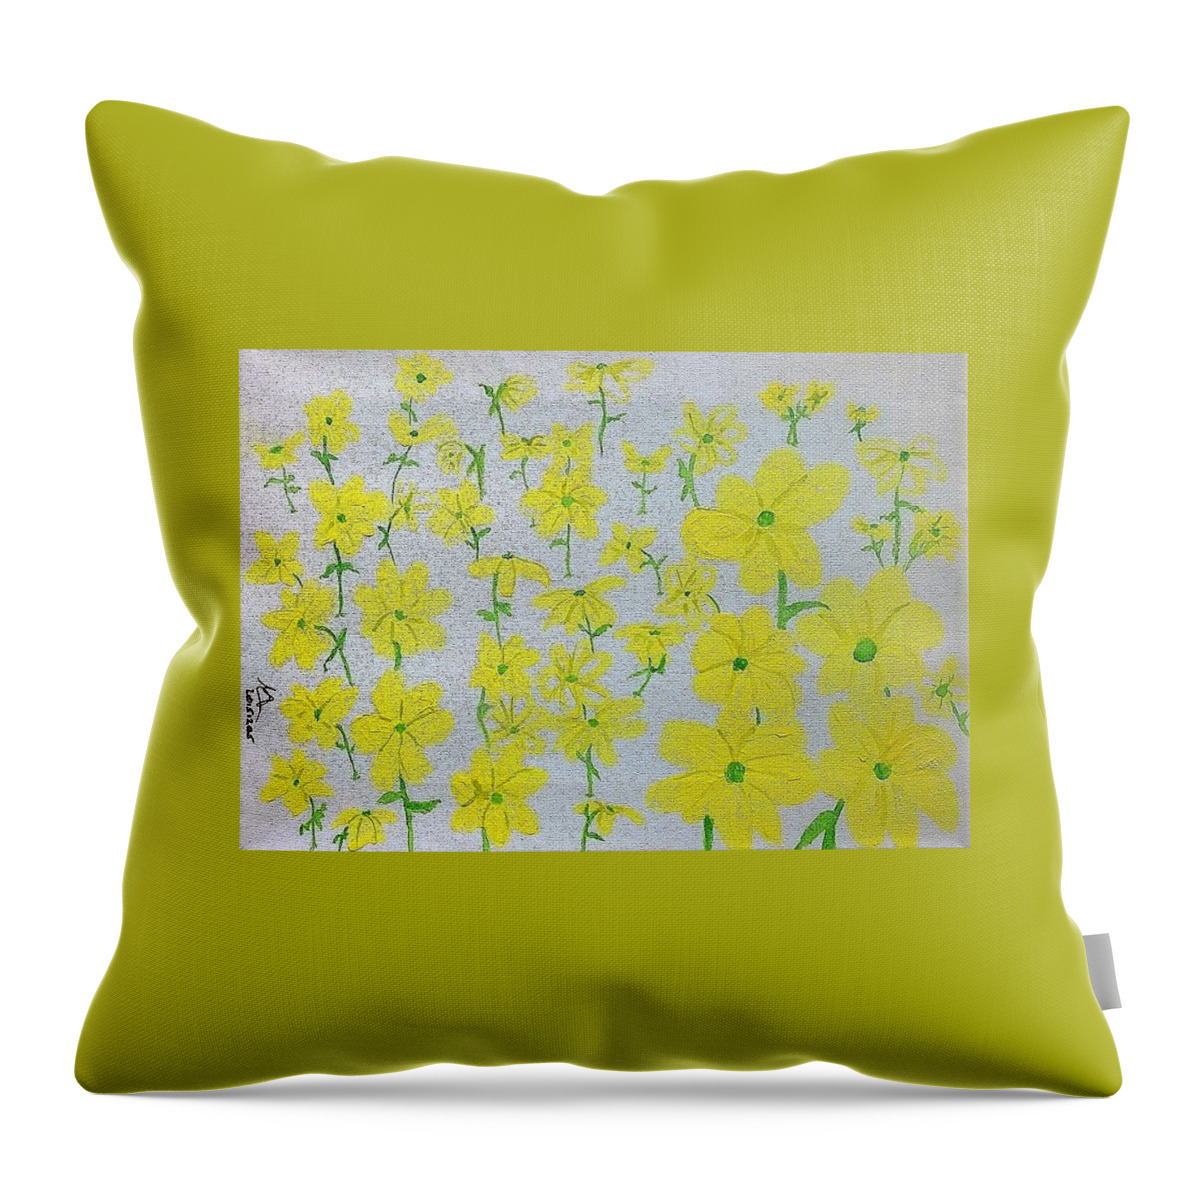 Dancing Daisies Throw Pillow featuring the painting Dancing Daisies by Mark C Jackson